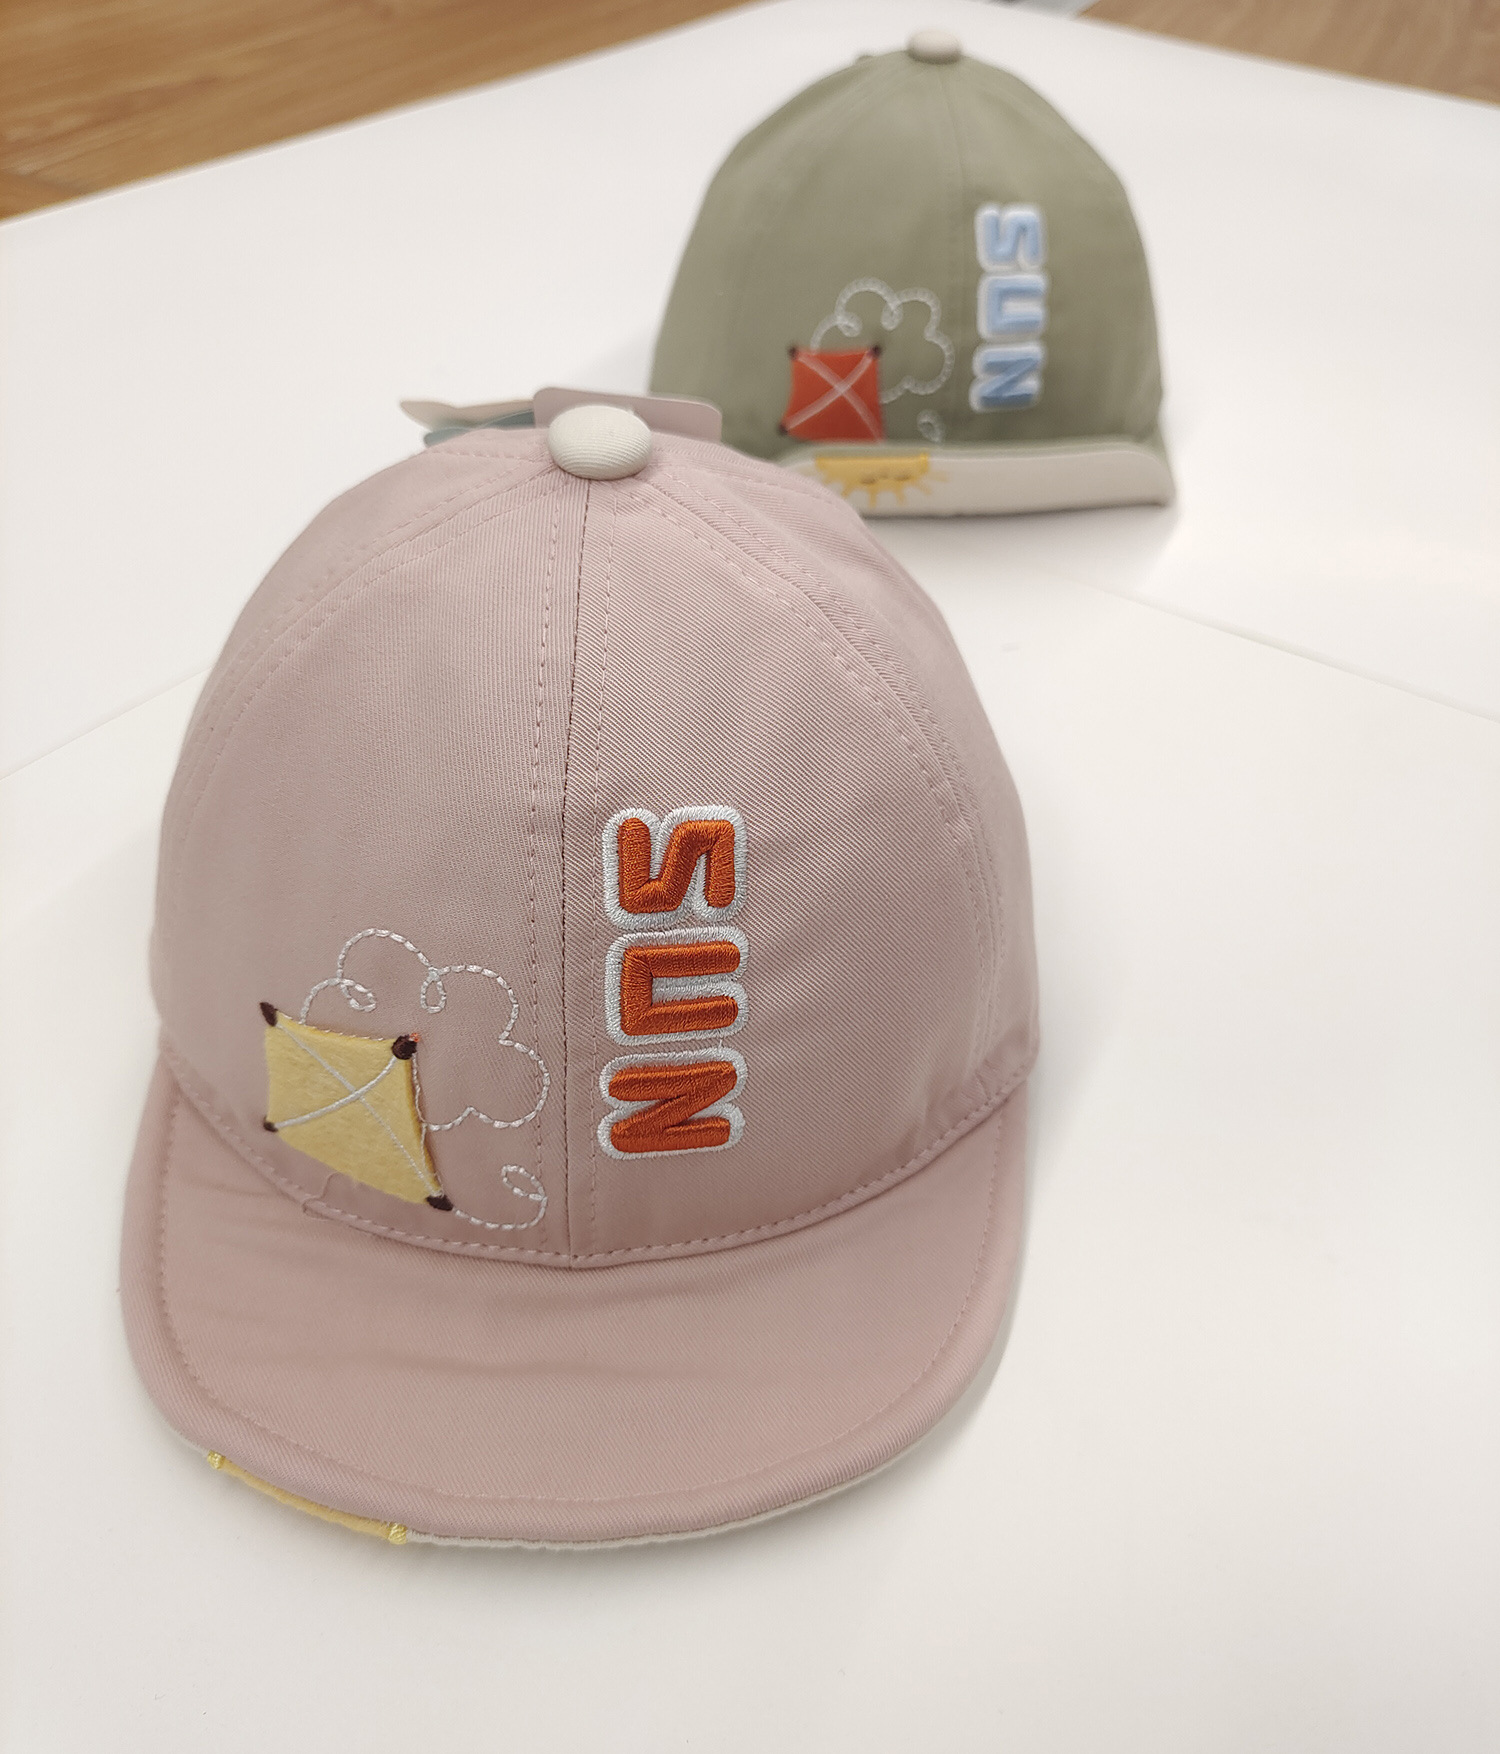 Children's Sun Hat Dudula Children's Sun-Proof Peaked Cap Kite Embroidered Hat with Tongue